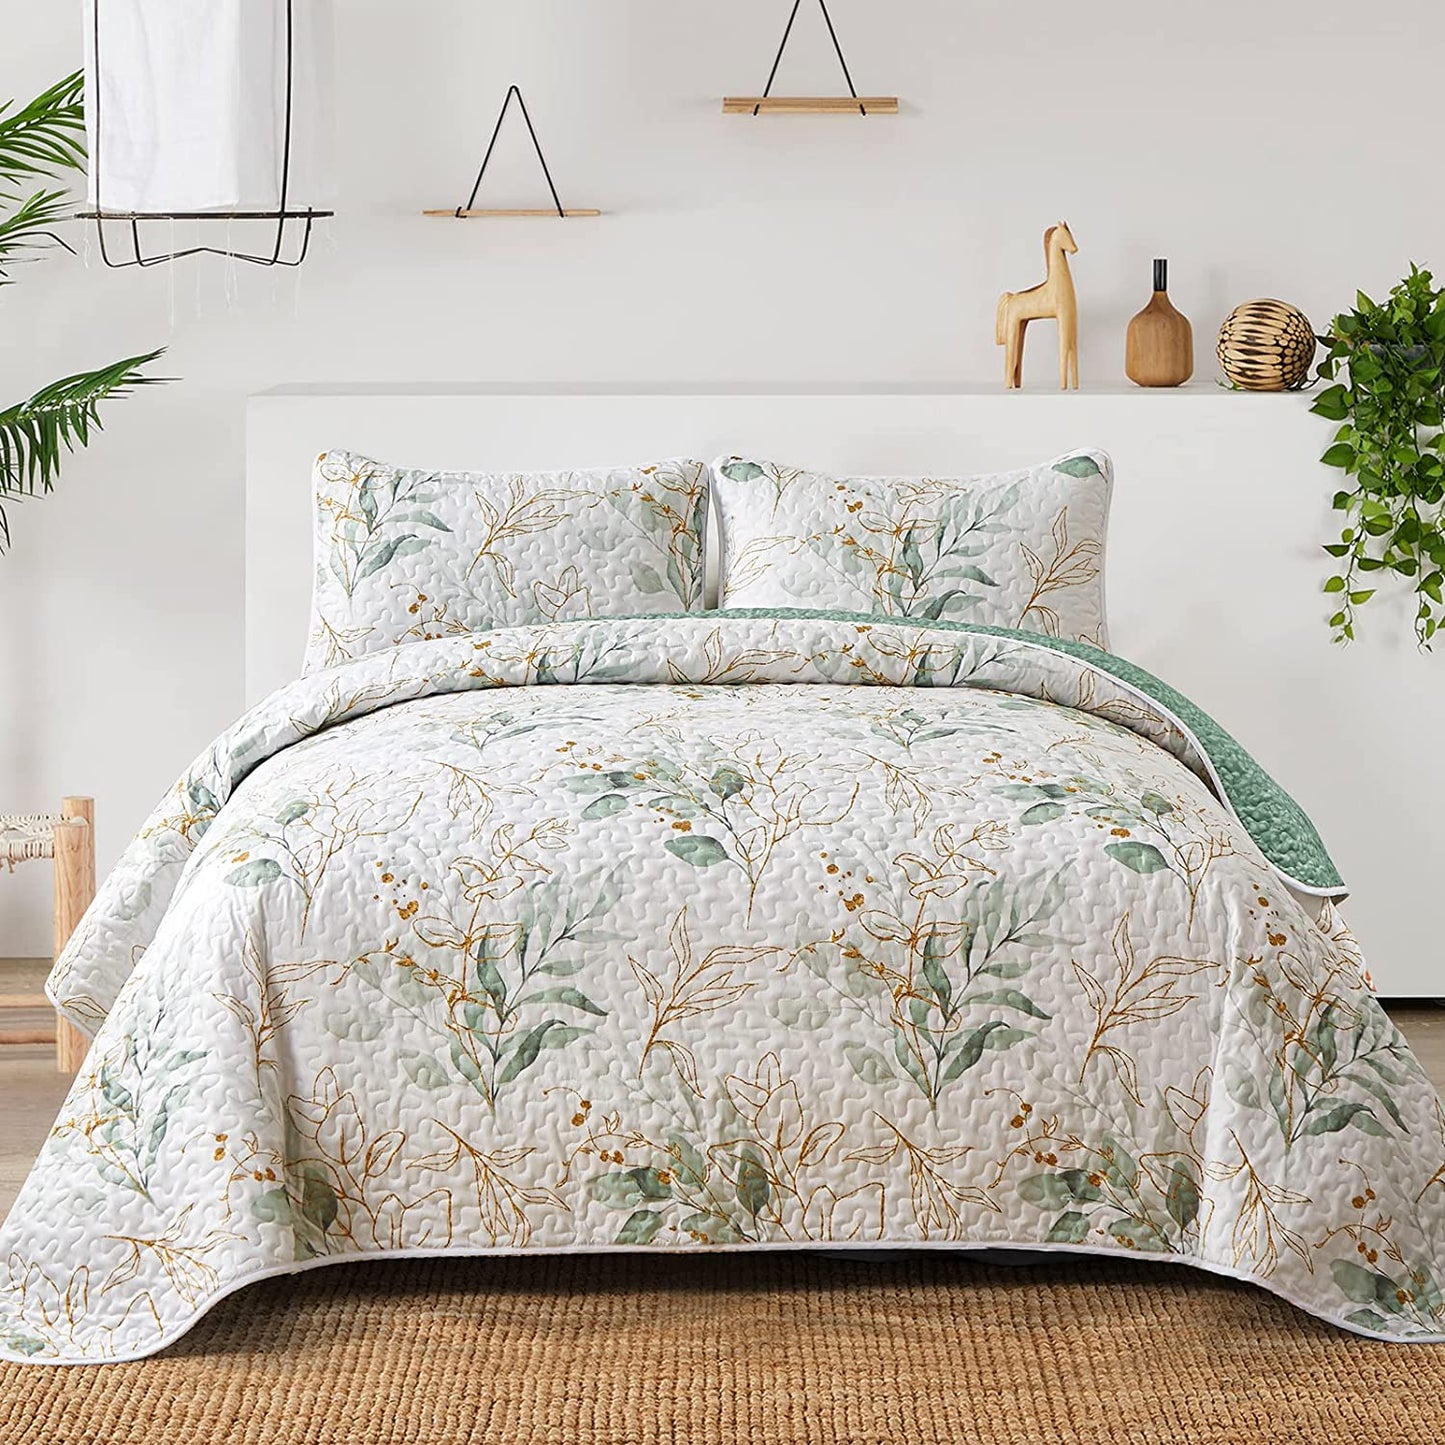 Floral Quilt King Size, Green Botanical King Quilt 3 Pieces